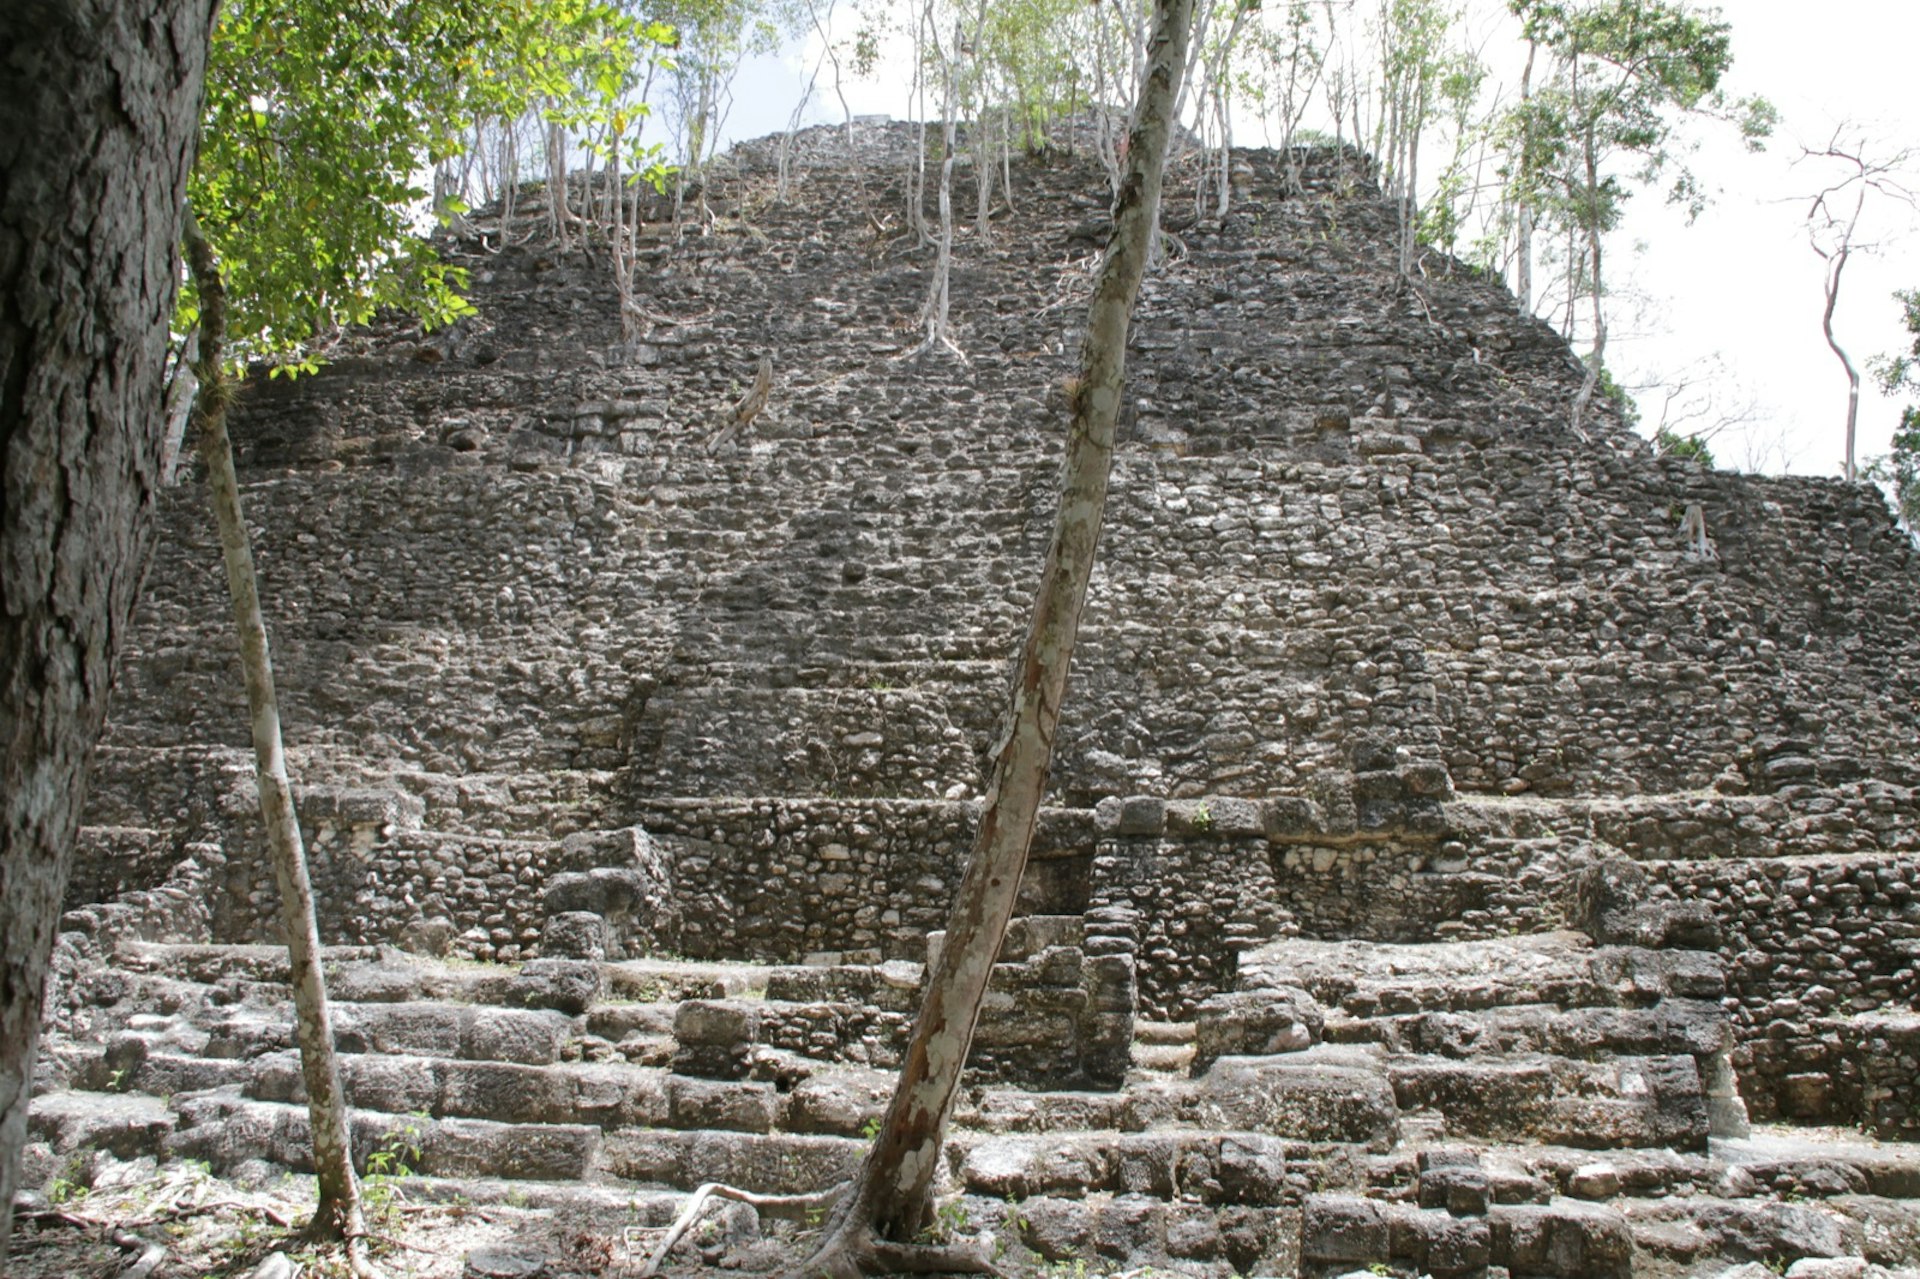 A close of view of La Danta shows trees growing through the stone structure © Ray Bartlett / Lonely Planet 